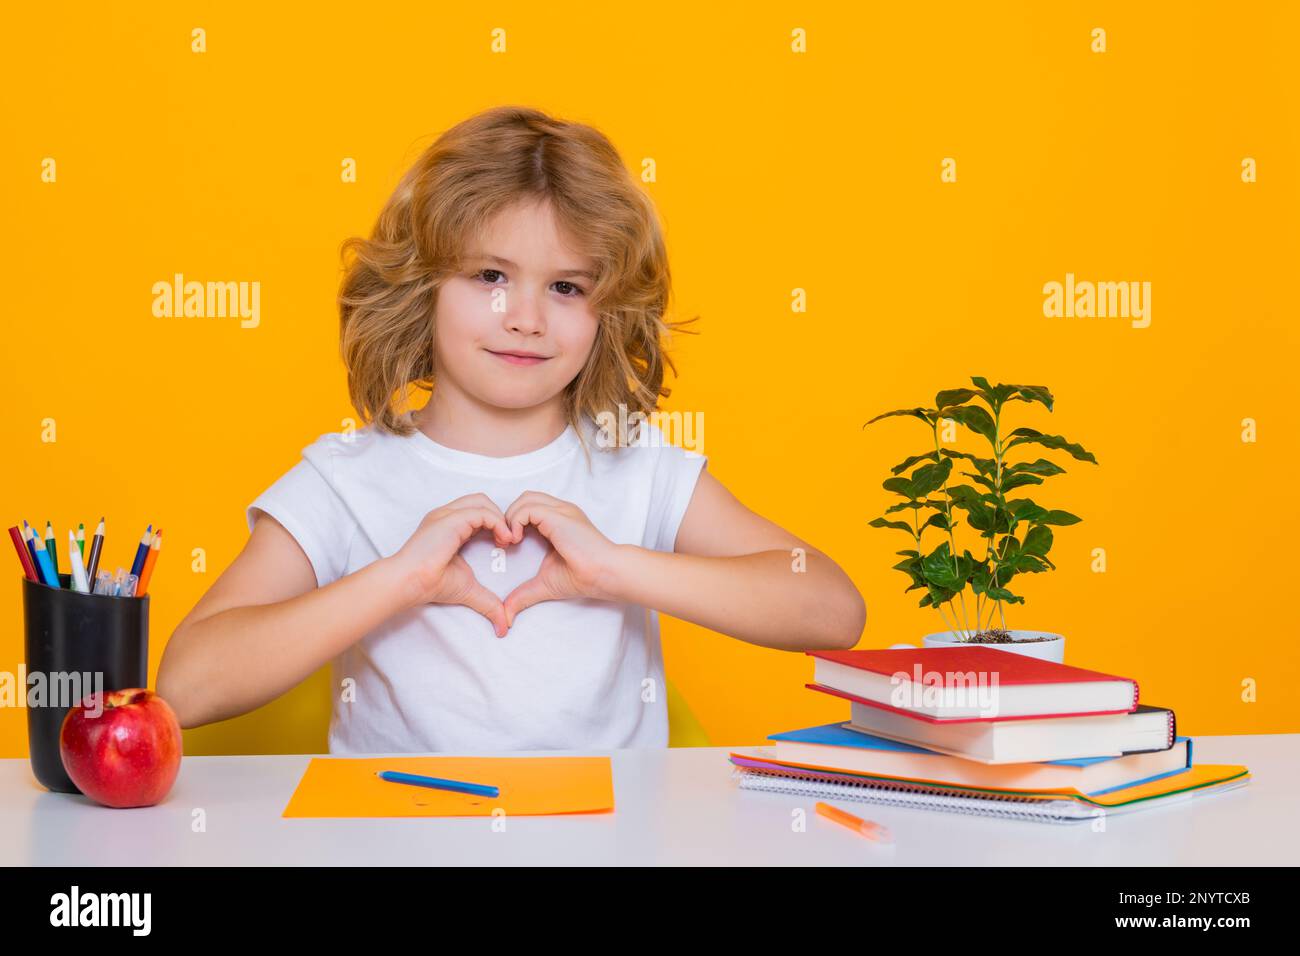 Pupil with love heard sign. Nerd pupil boy from elementary school with book isolated on yellow studio background. Smart genius intelligence kid ready Stock Photo